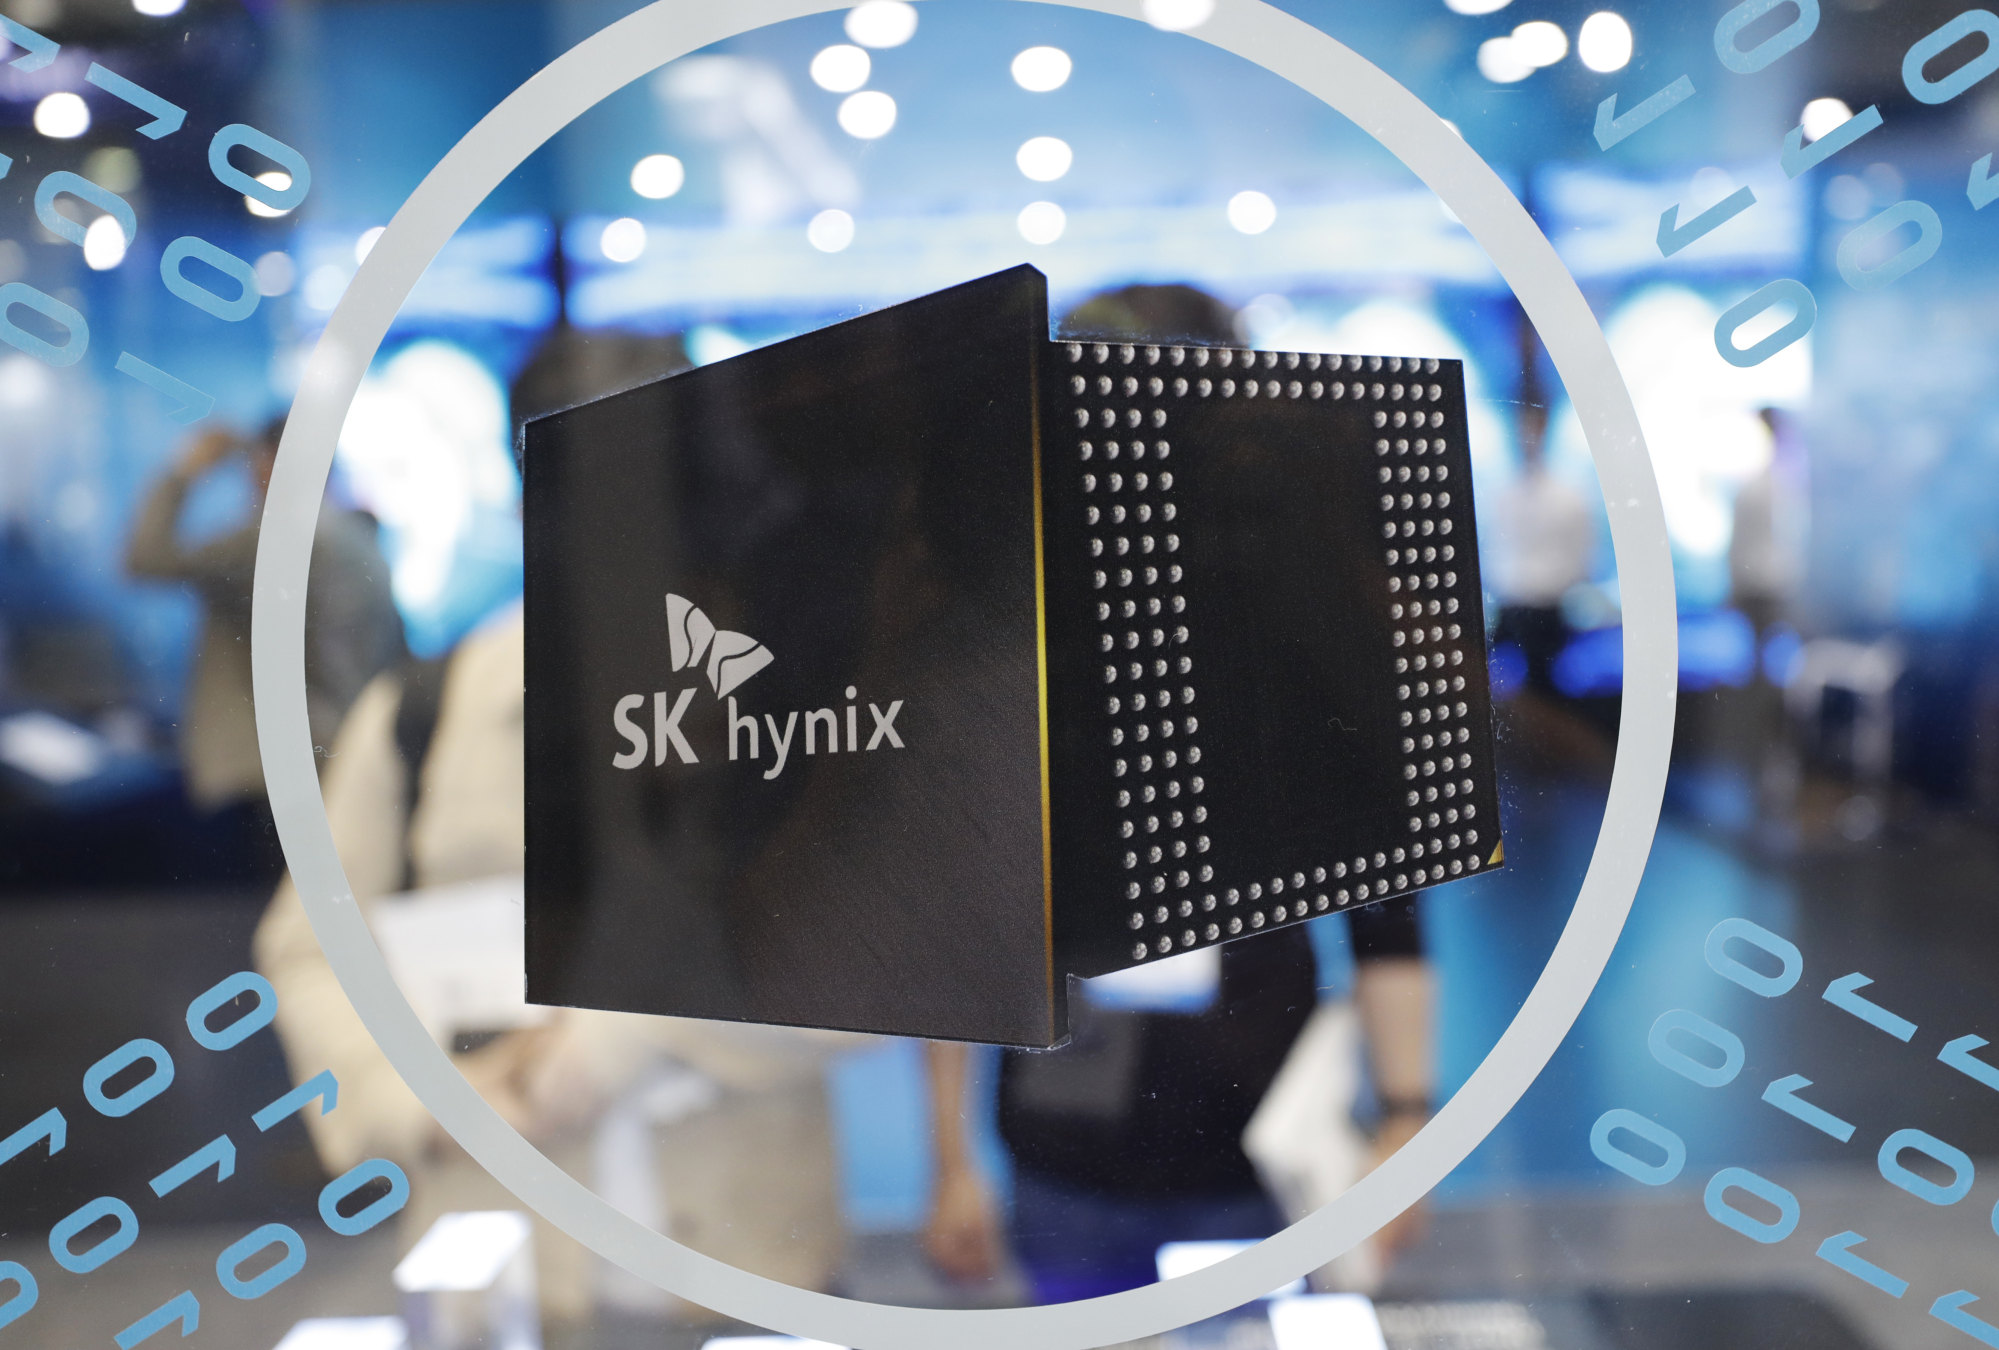 The SK Hynix logo is seen on a display at the Korea Electronics Show in Seoul, Oct. 8, 2019. Photo: AP